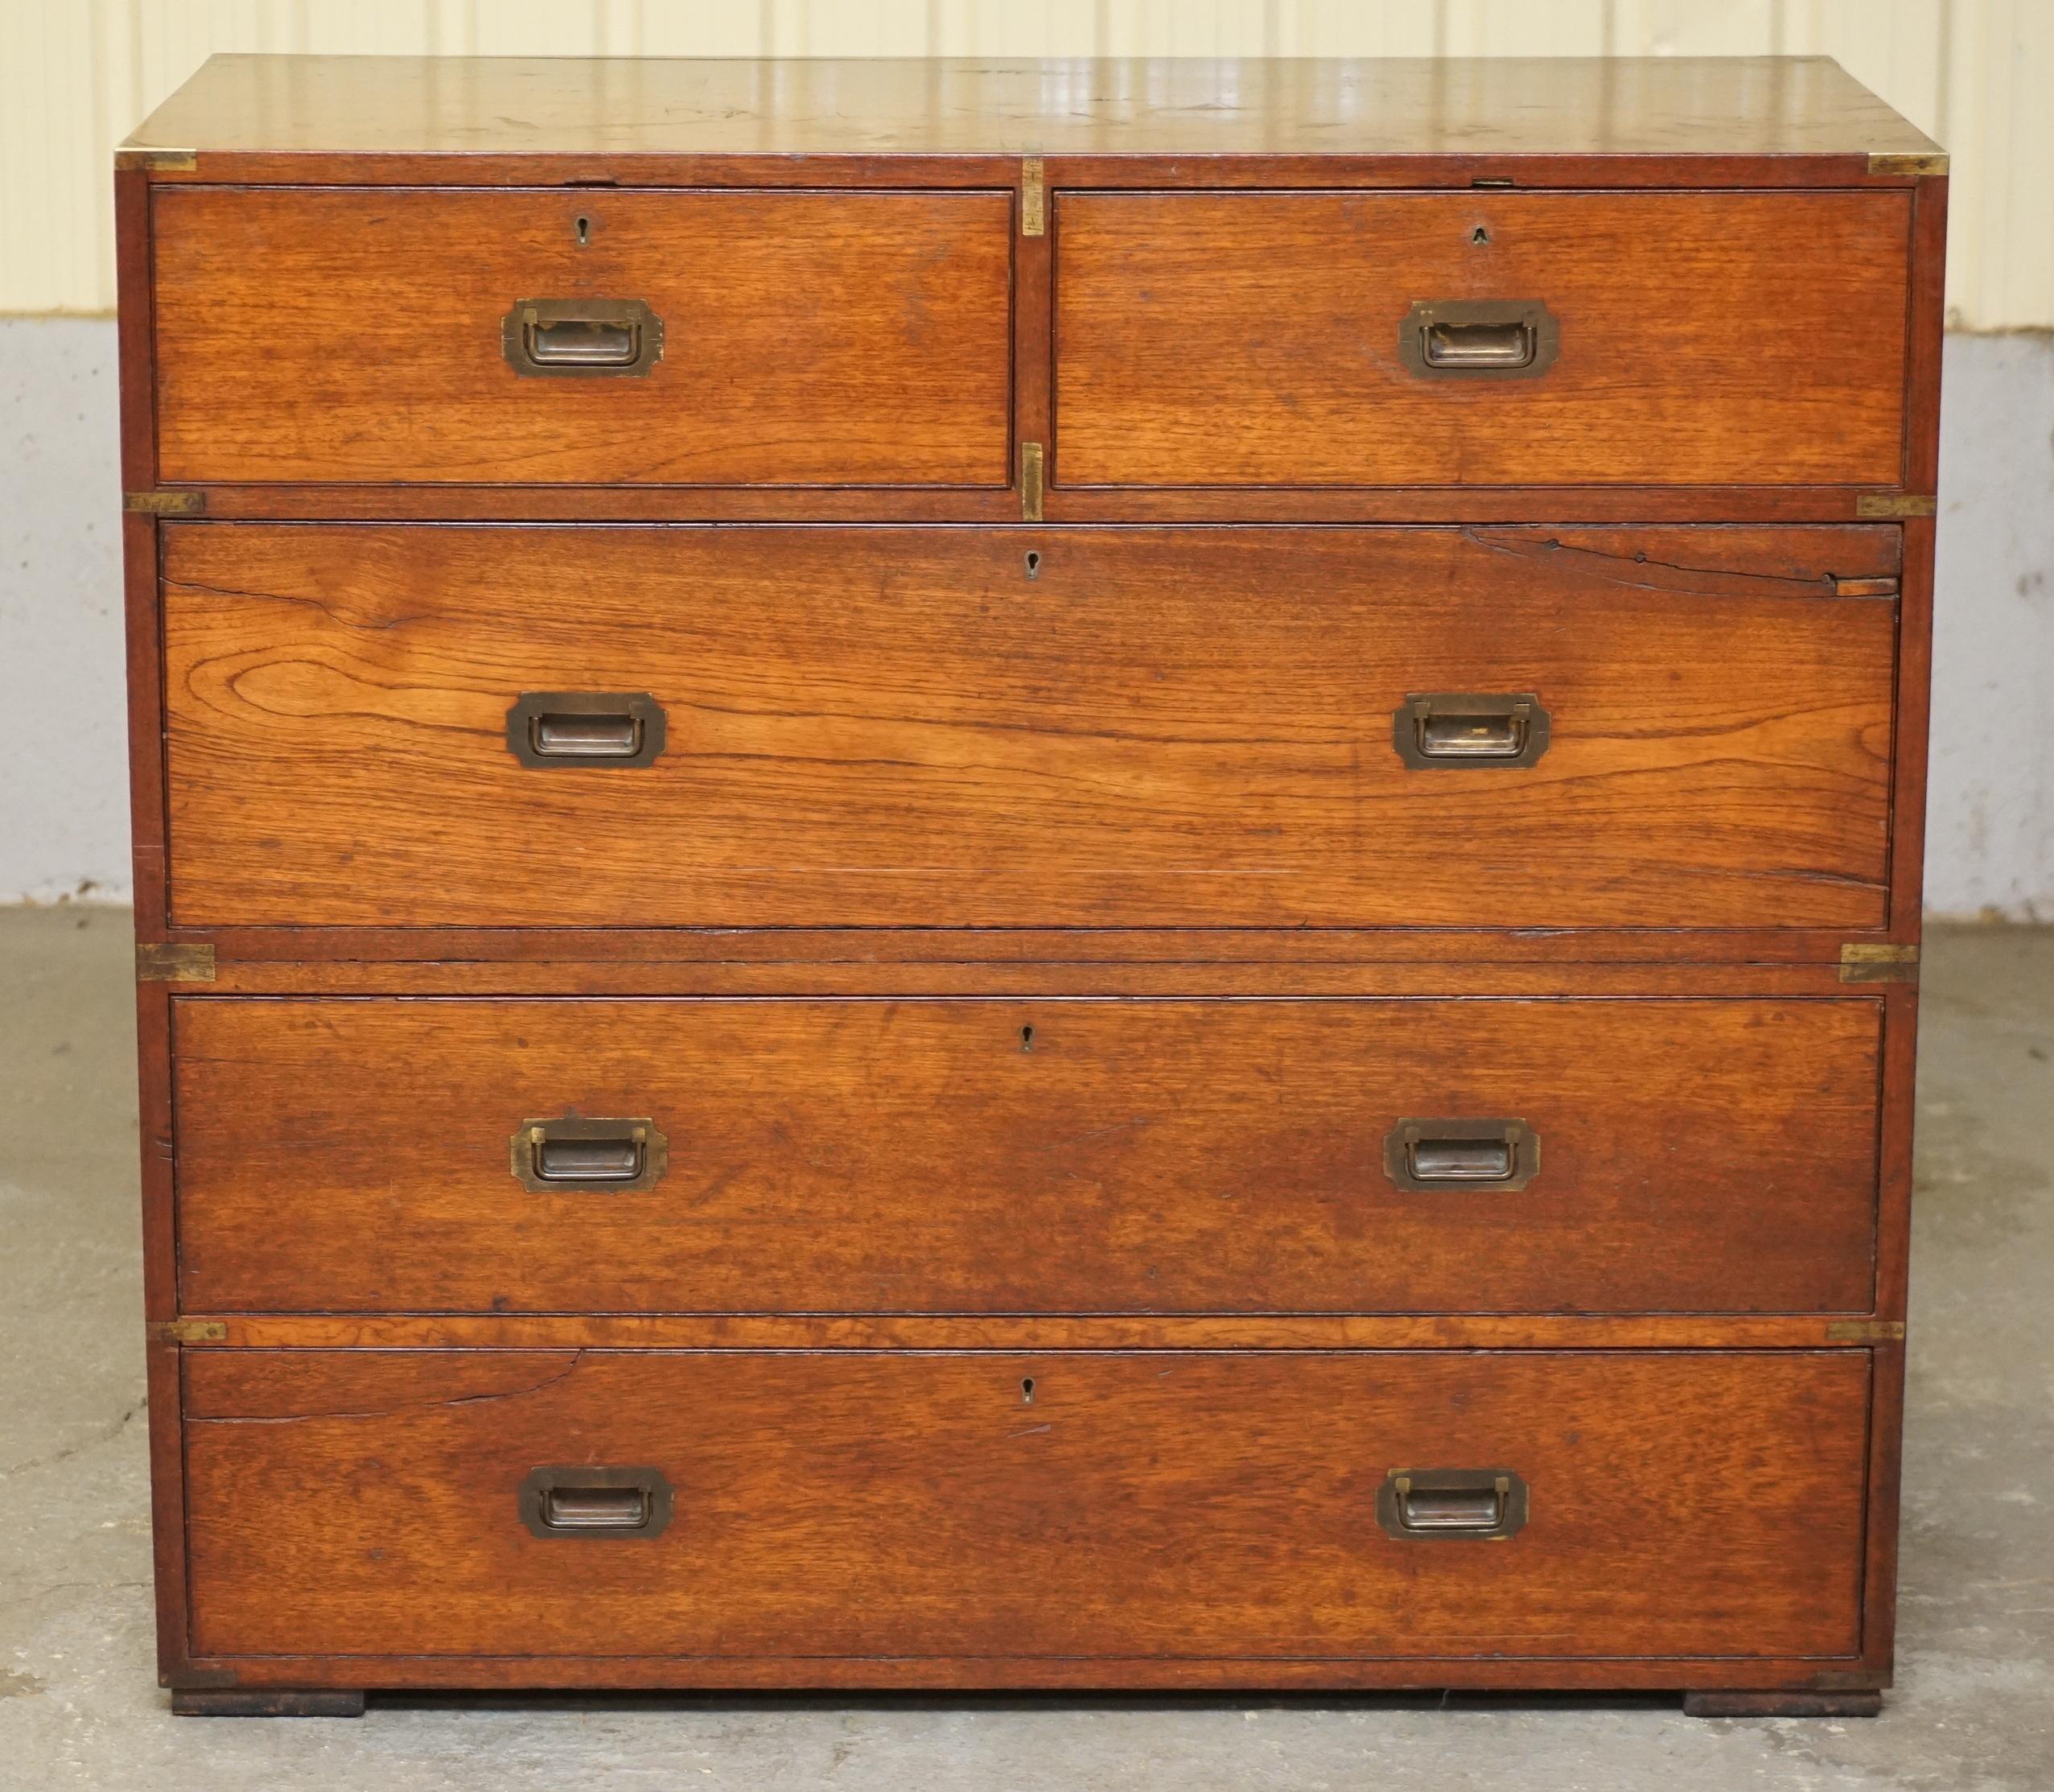 English Original circa 1900 Army & Navy C.S.L Stamped Military Campaign Chest of Drawers